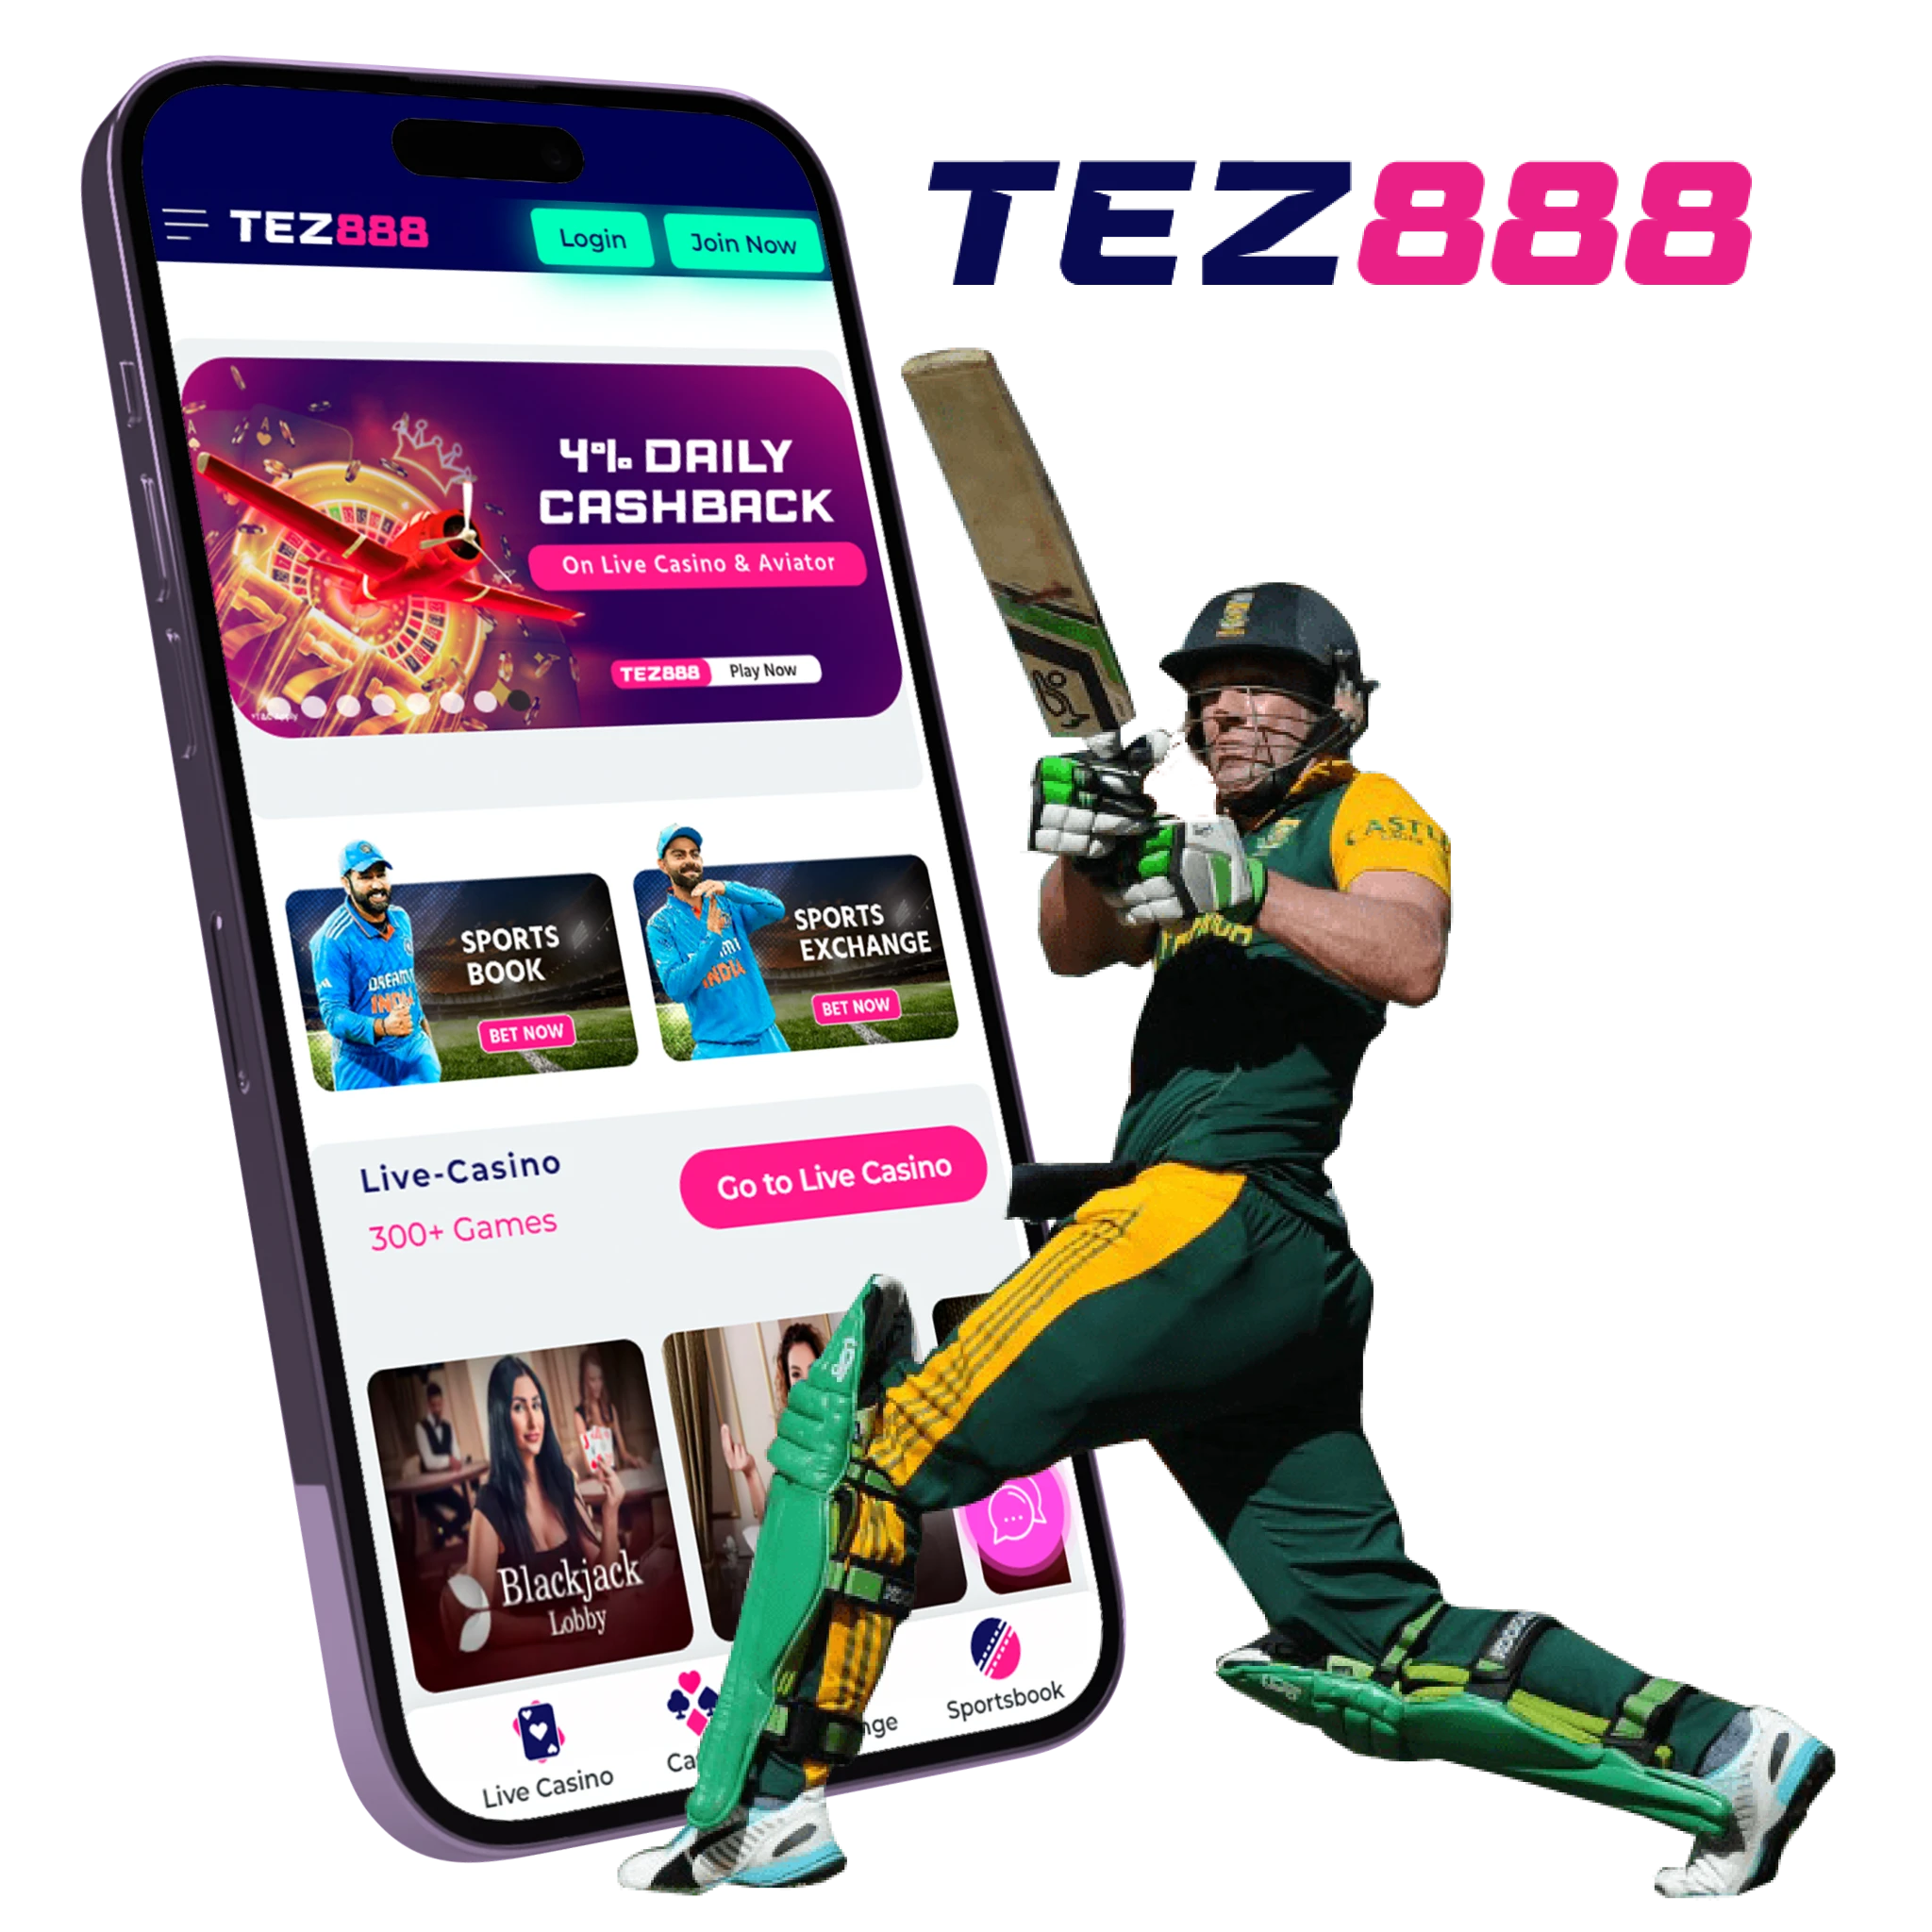 You can get an impressive experiense of cricket betting with Tez888 mobile app.